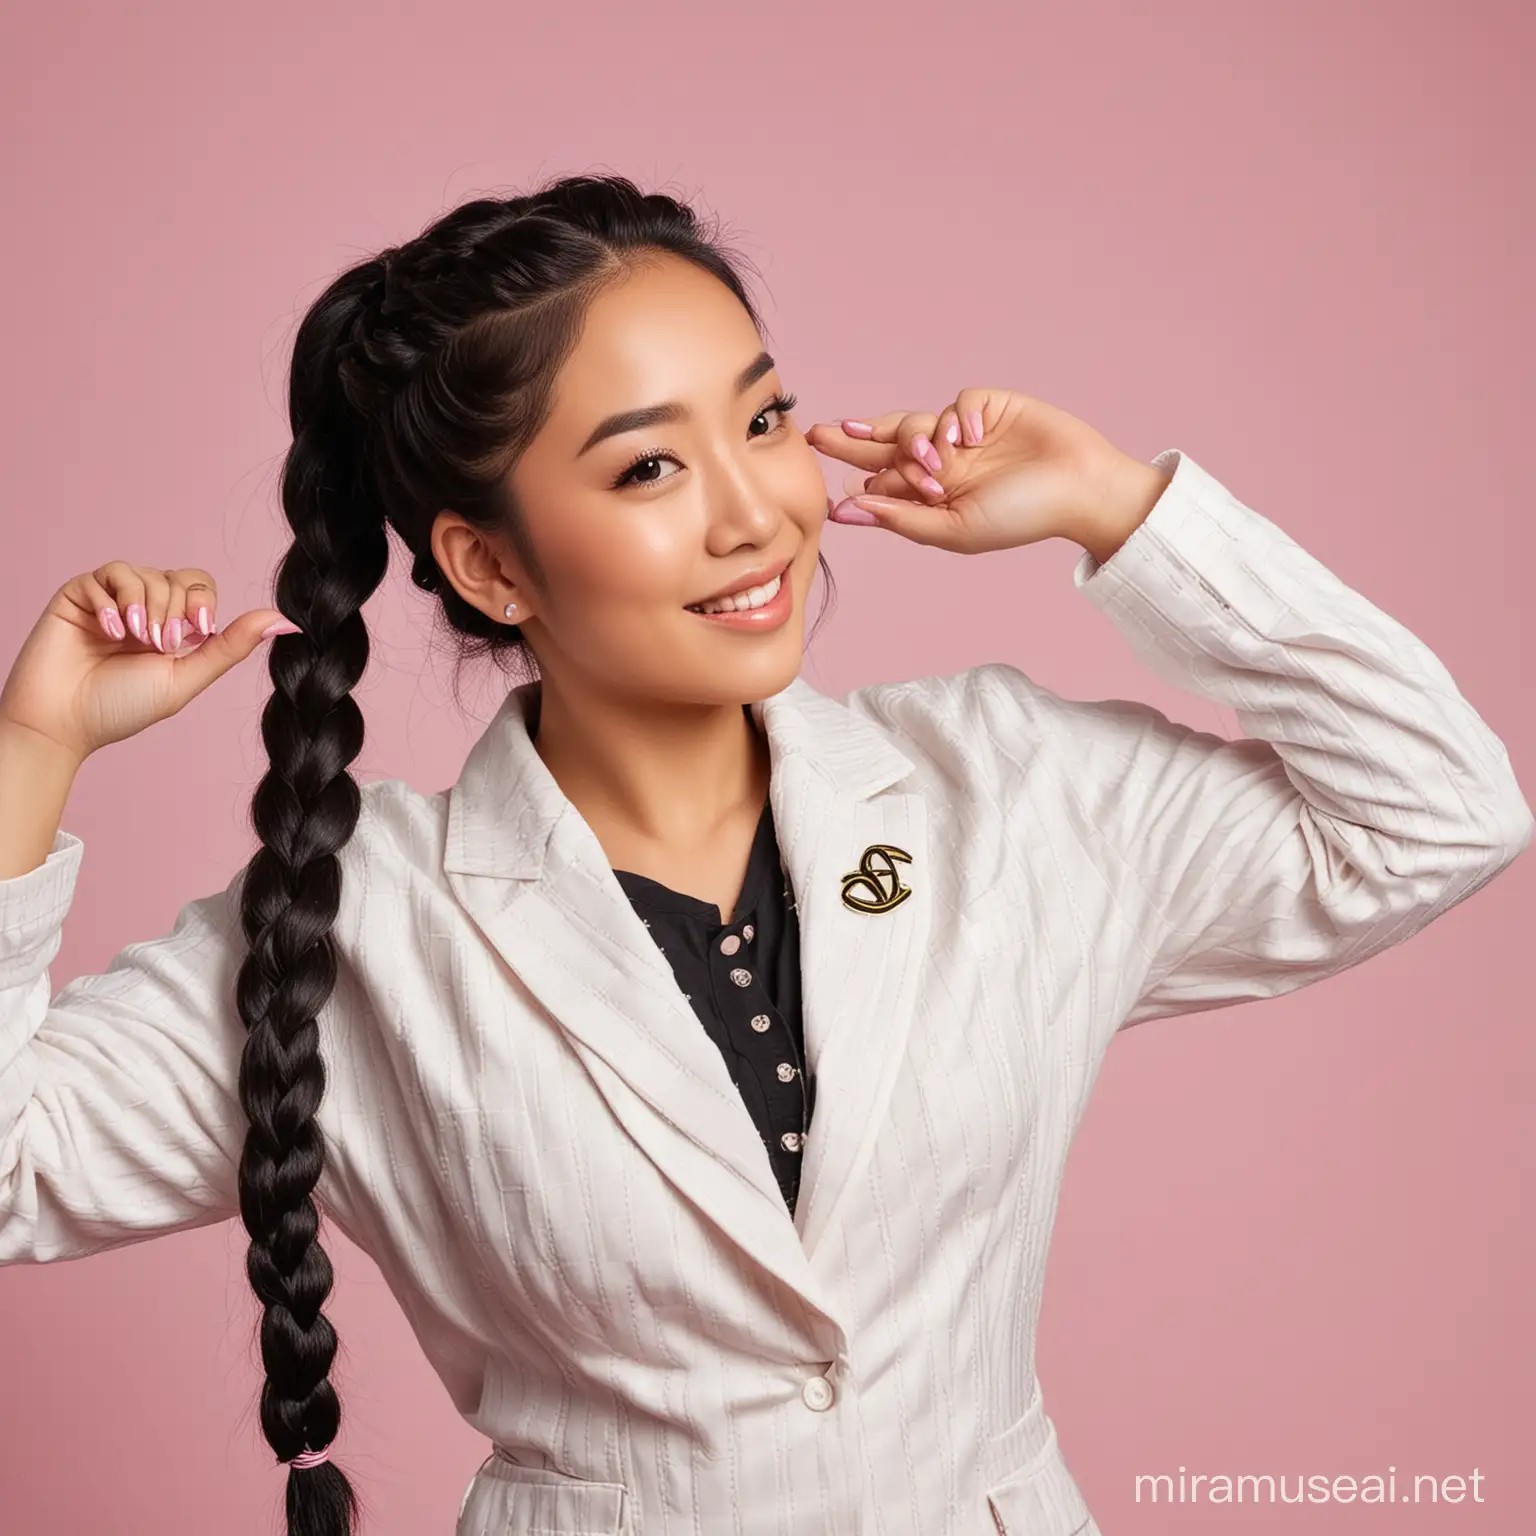 Portrait photo of a beautiful Asian woman who is slightly fat, has long straight black hair, the top of her head is braided in a large corn braid and the back is tied with a rope. Wearing a white suit with a very small checkered pattern, wearing a black t-shirt underneath. Slightly smile. Hands raised to form a peace symbol, neat pink nails.  Picture perfect and no errors.